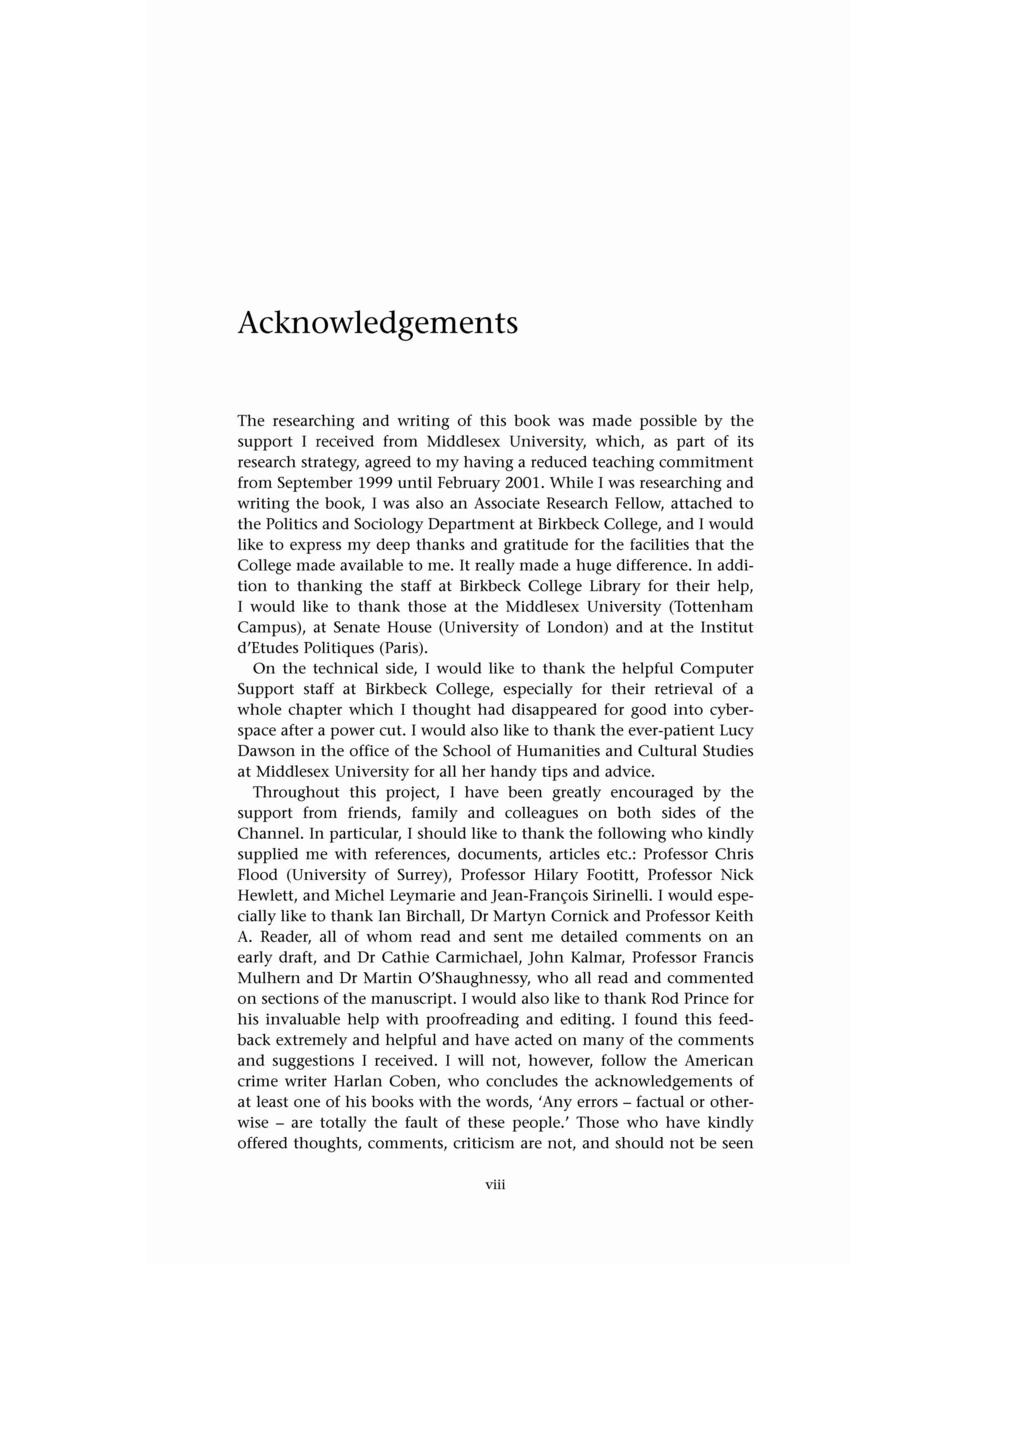 Acknowledgements The researching and writing of this book was made possible by the support 1 received from Middlesex University, which, as part of its research strategy, agreed to my having a reduced